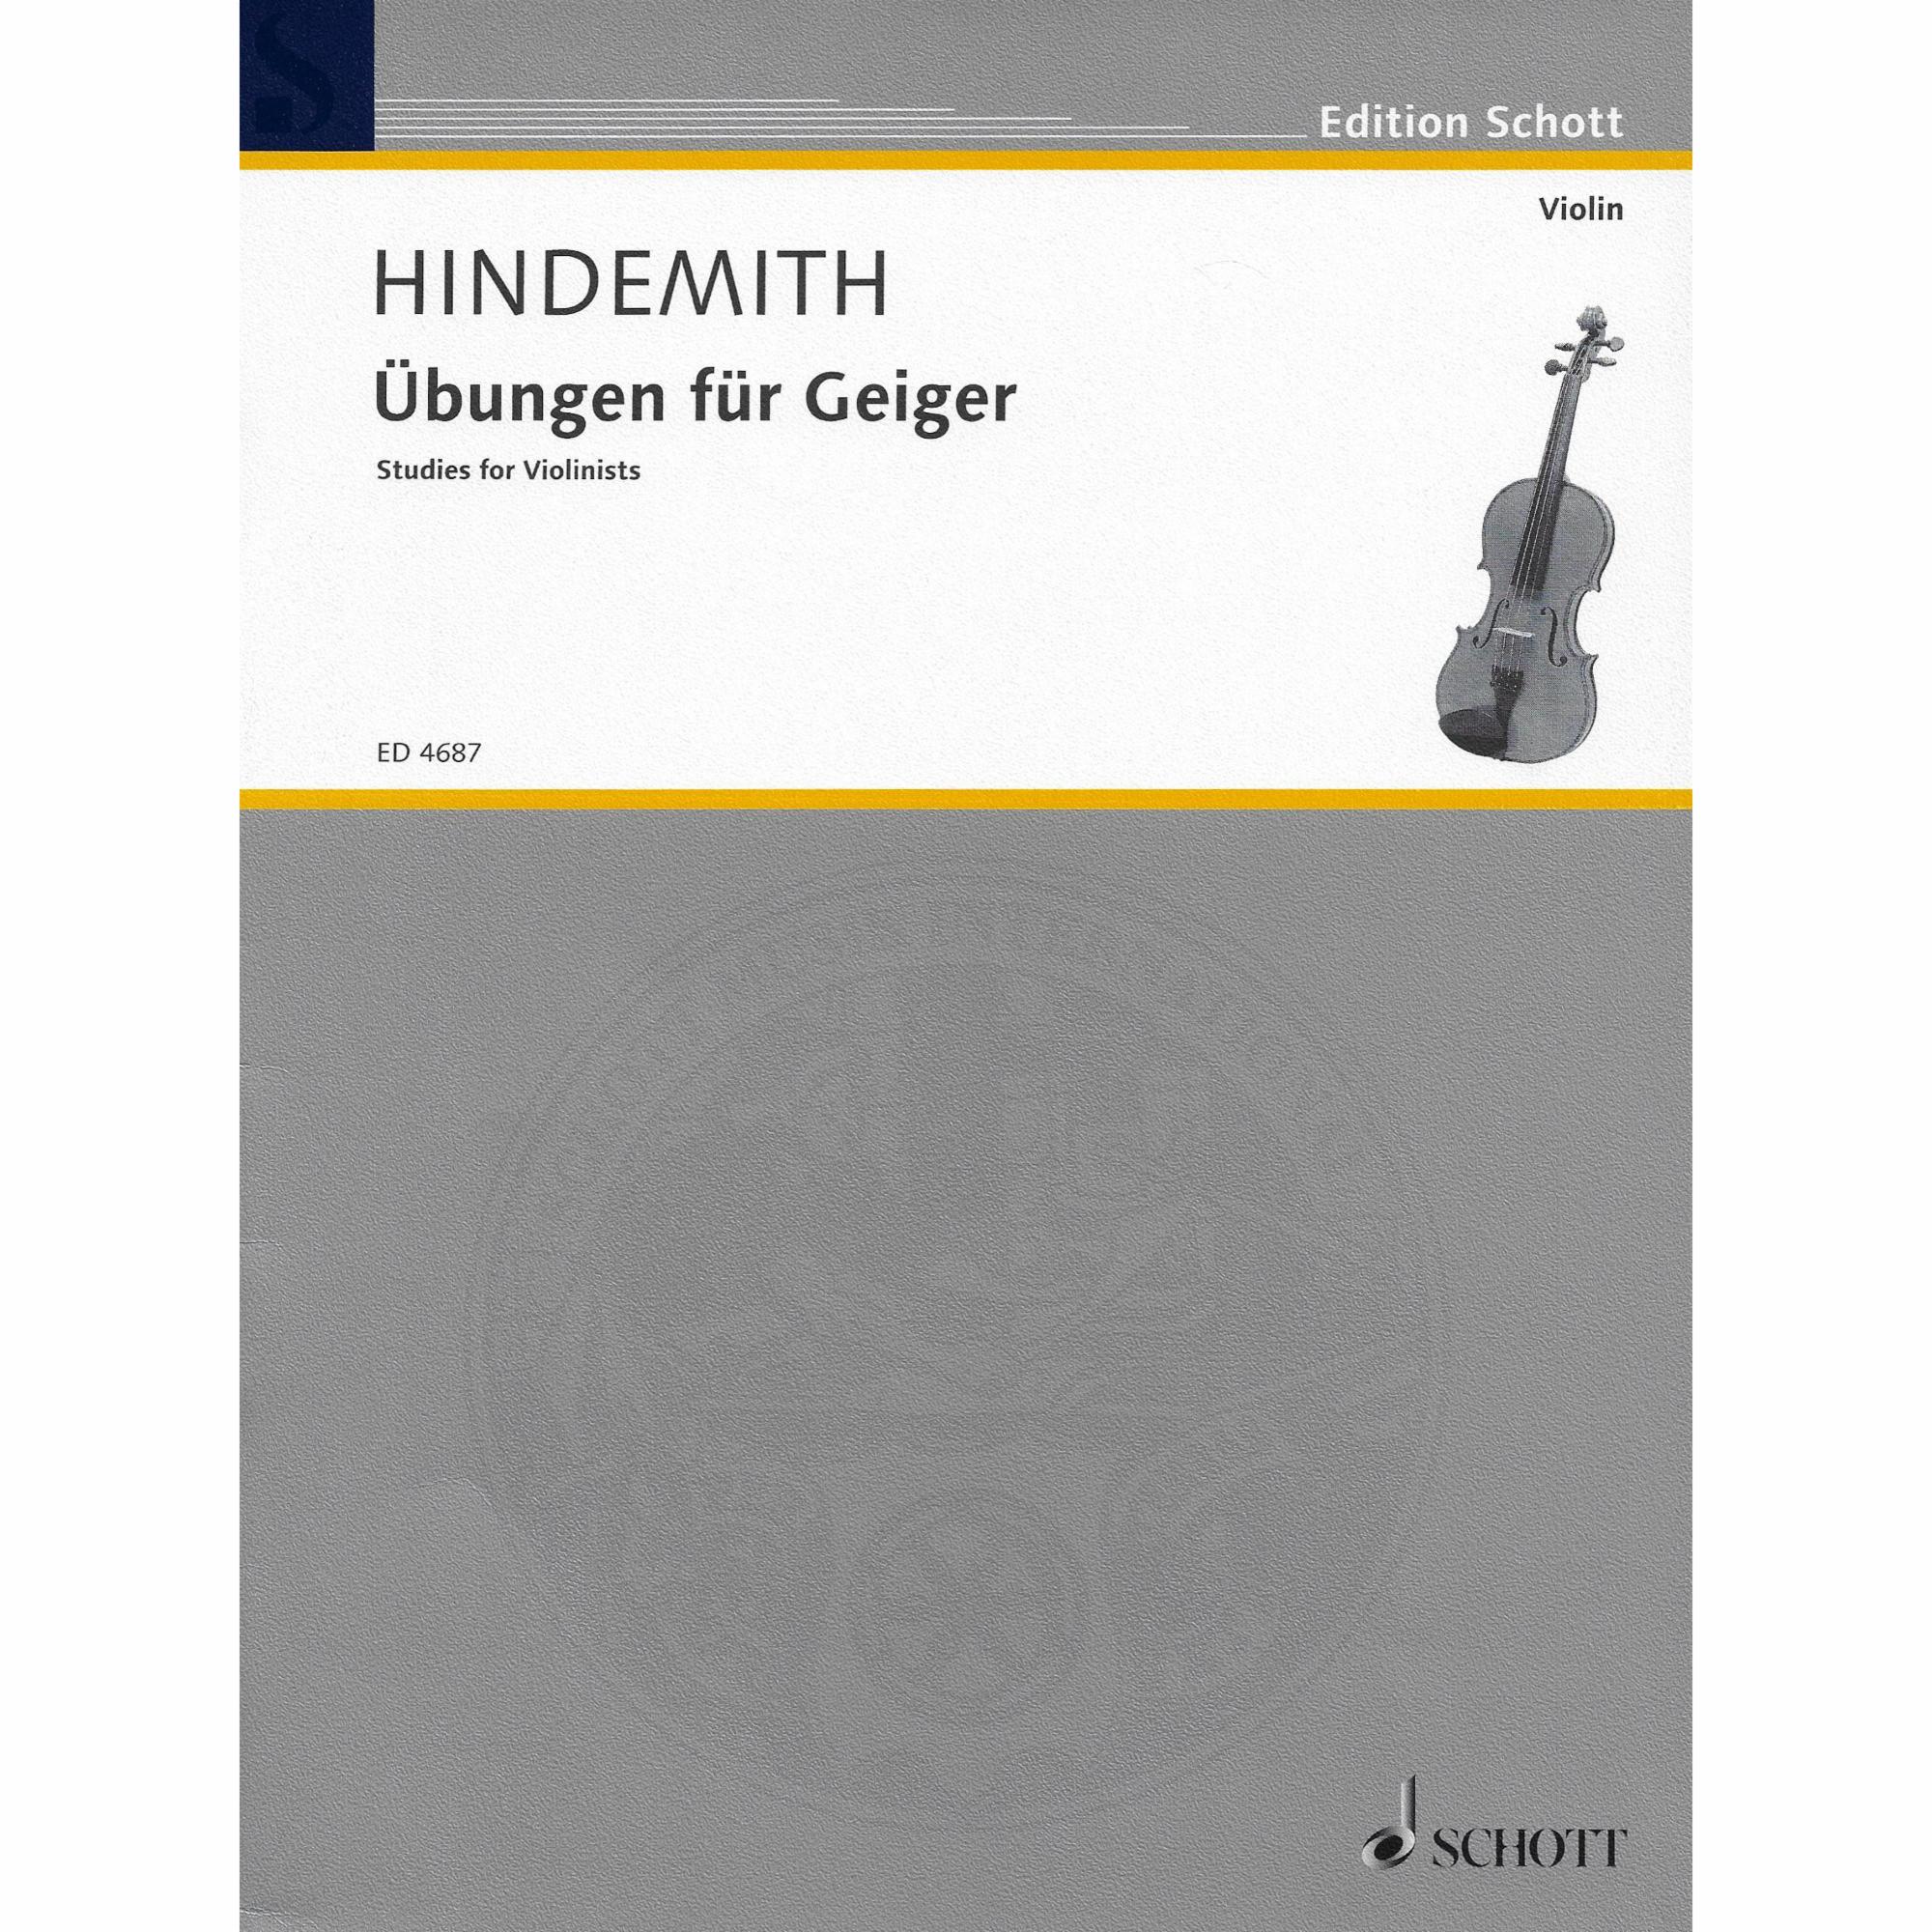 Hindemith -- Studies for Violinists